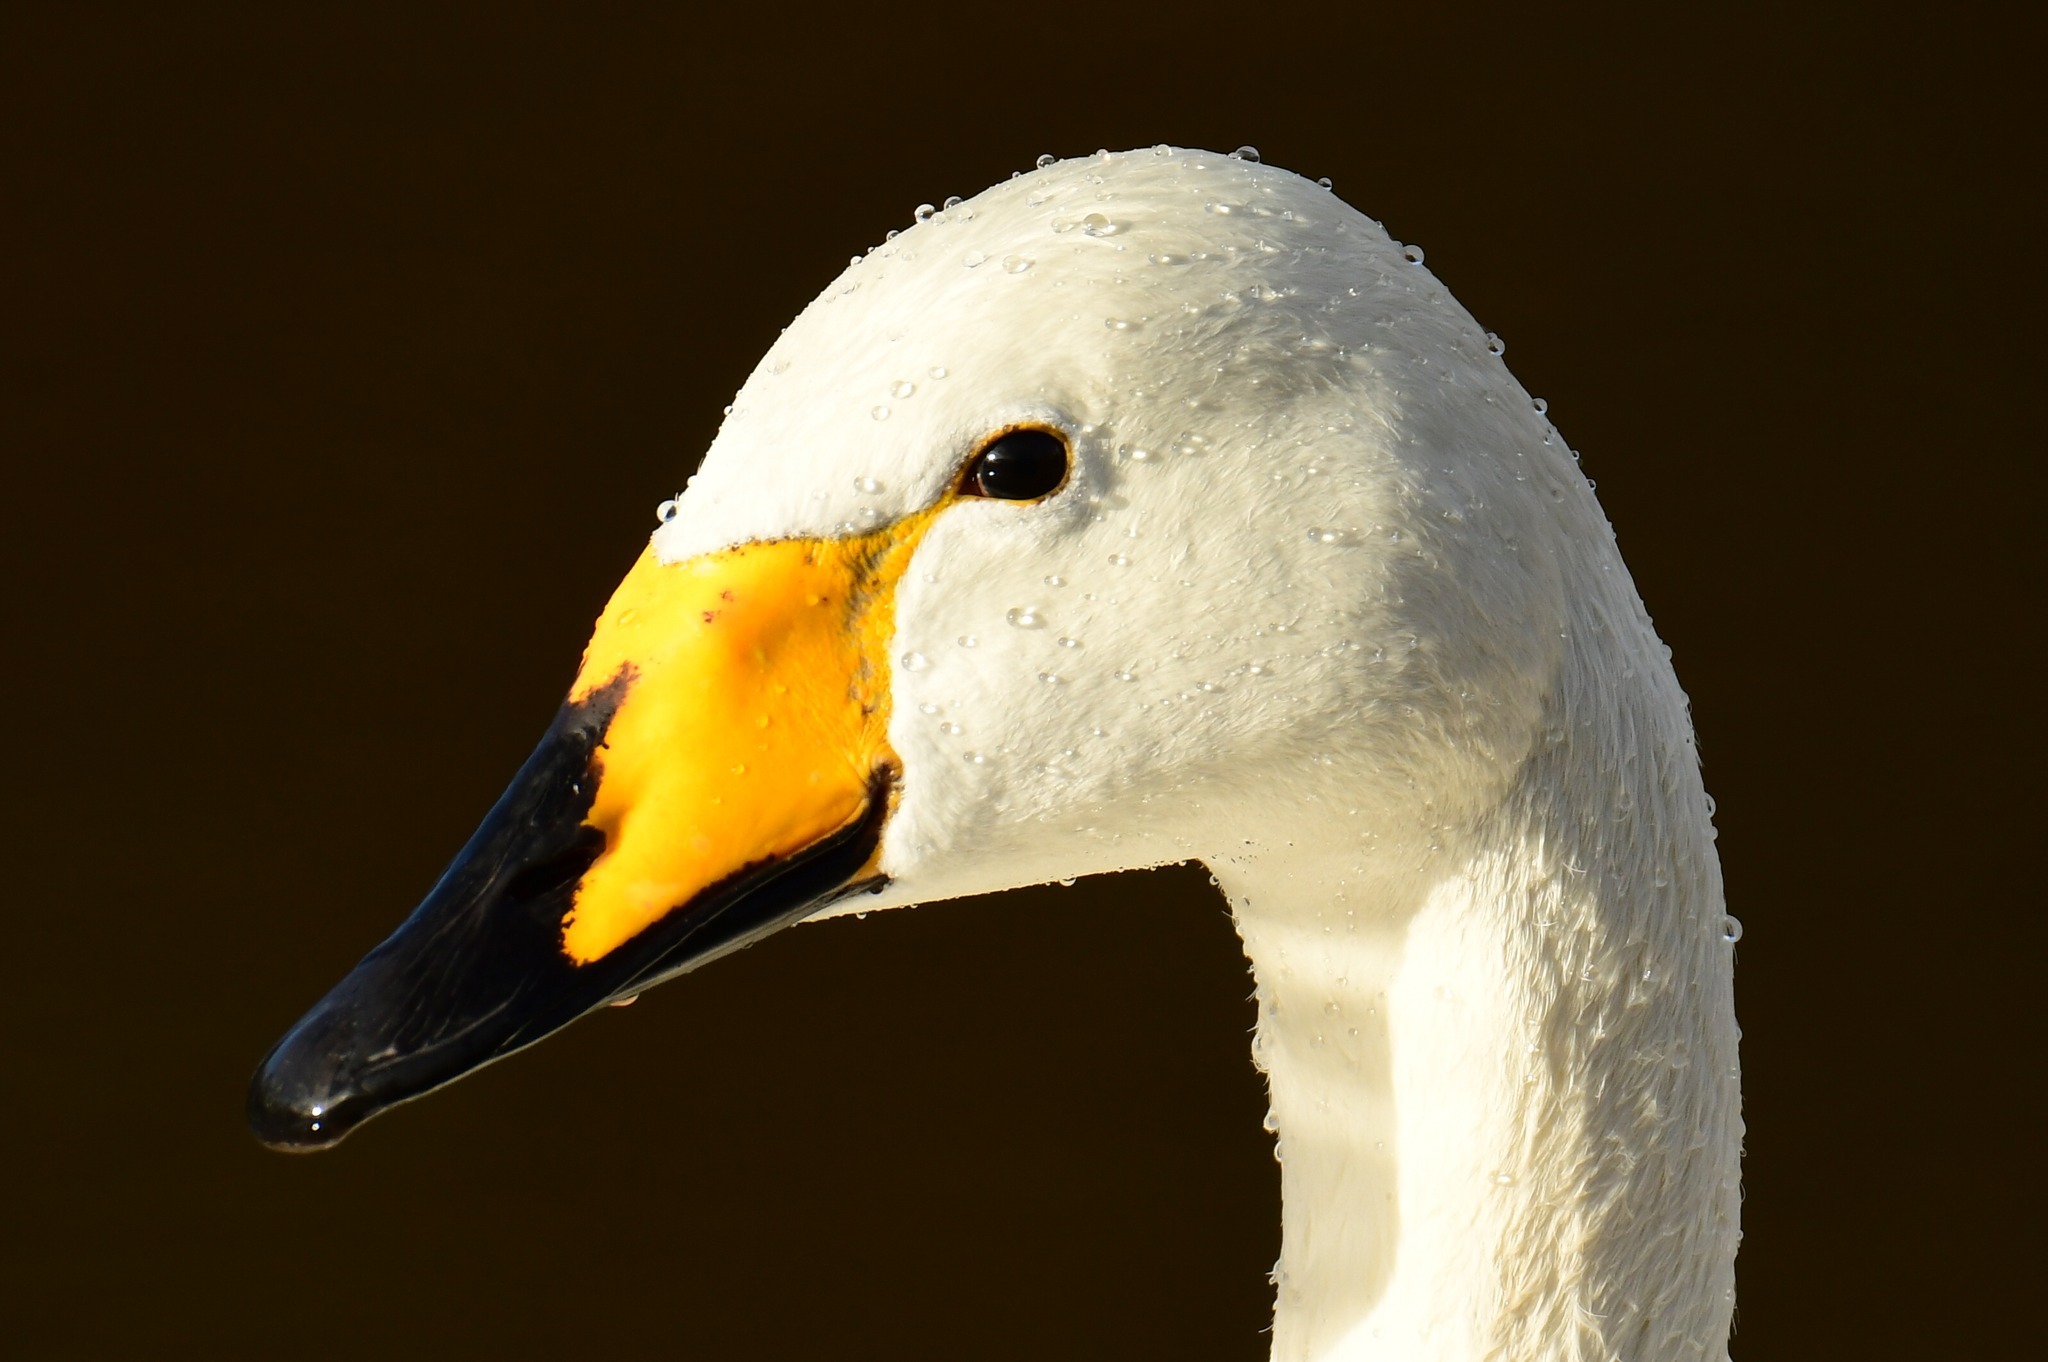 A hooper swan drying off in the winter sunshine by Paul Wright